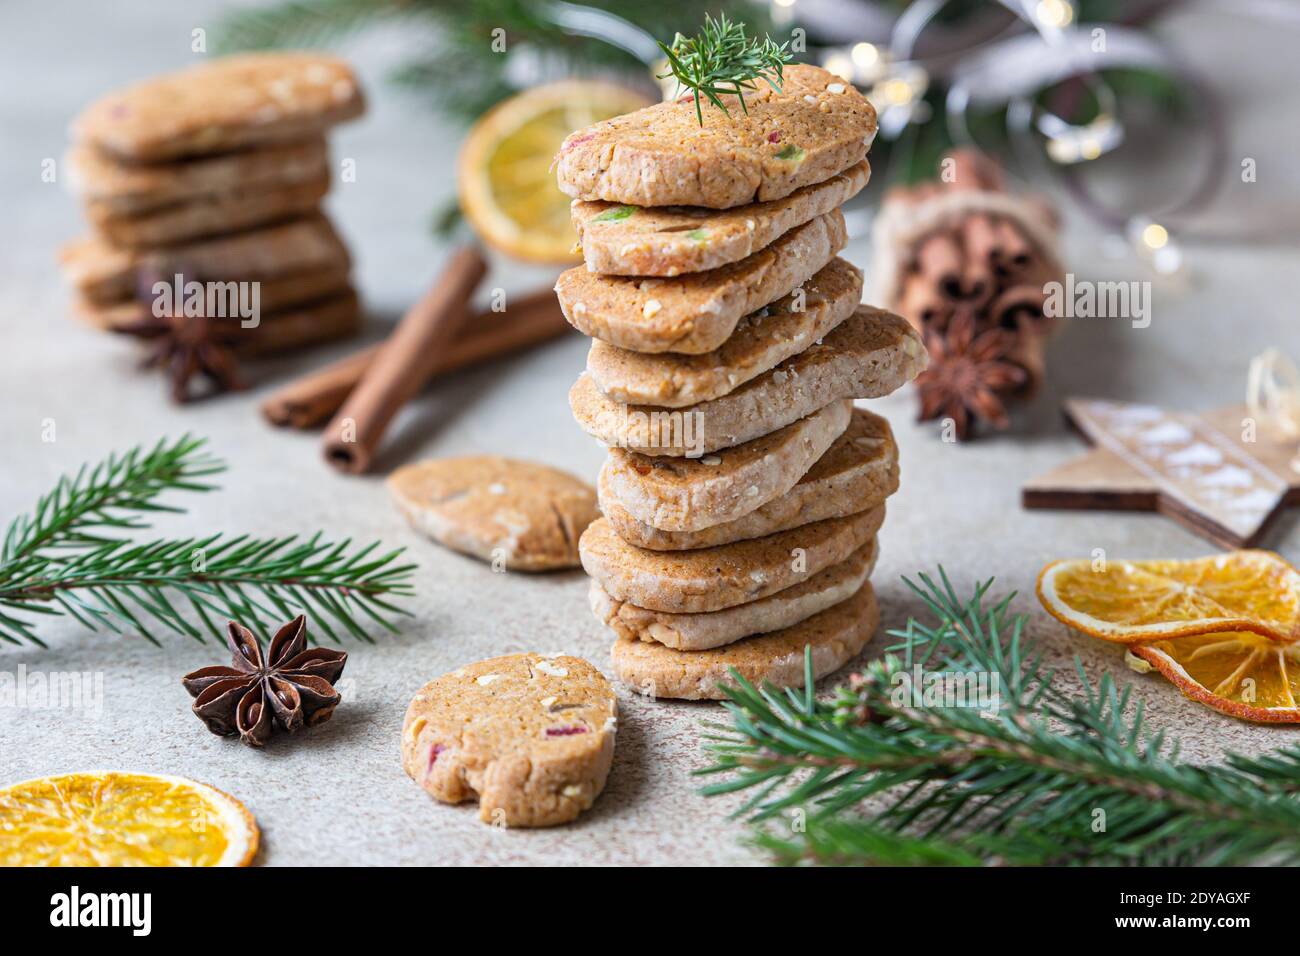 Stacked spicy butter cookies with candied fruits, cinnamon sticks and anise. Festive Christmas or New Year background with fir branches and dried oran Stock Photo